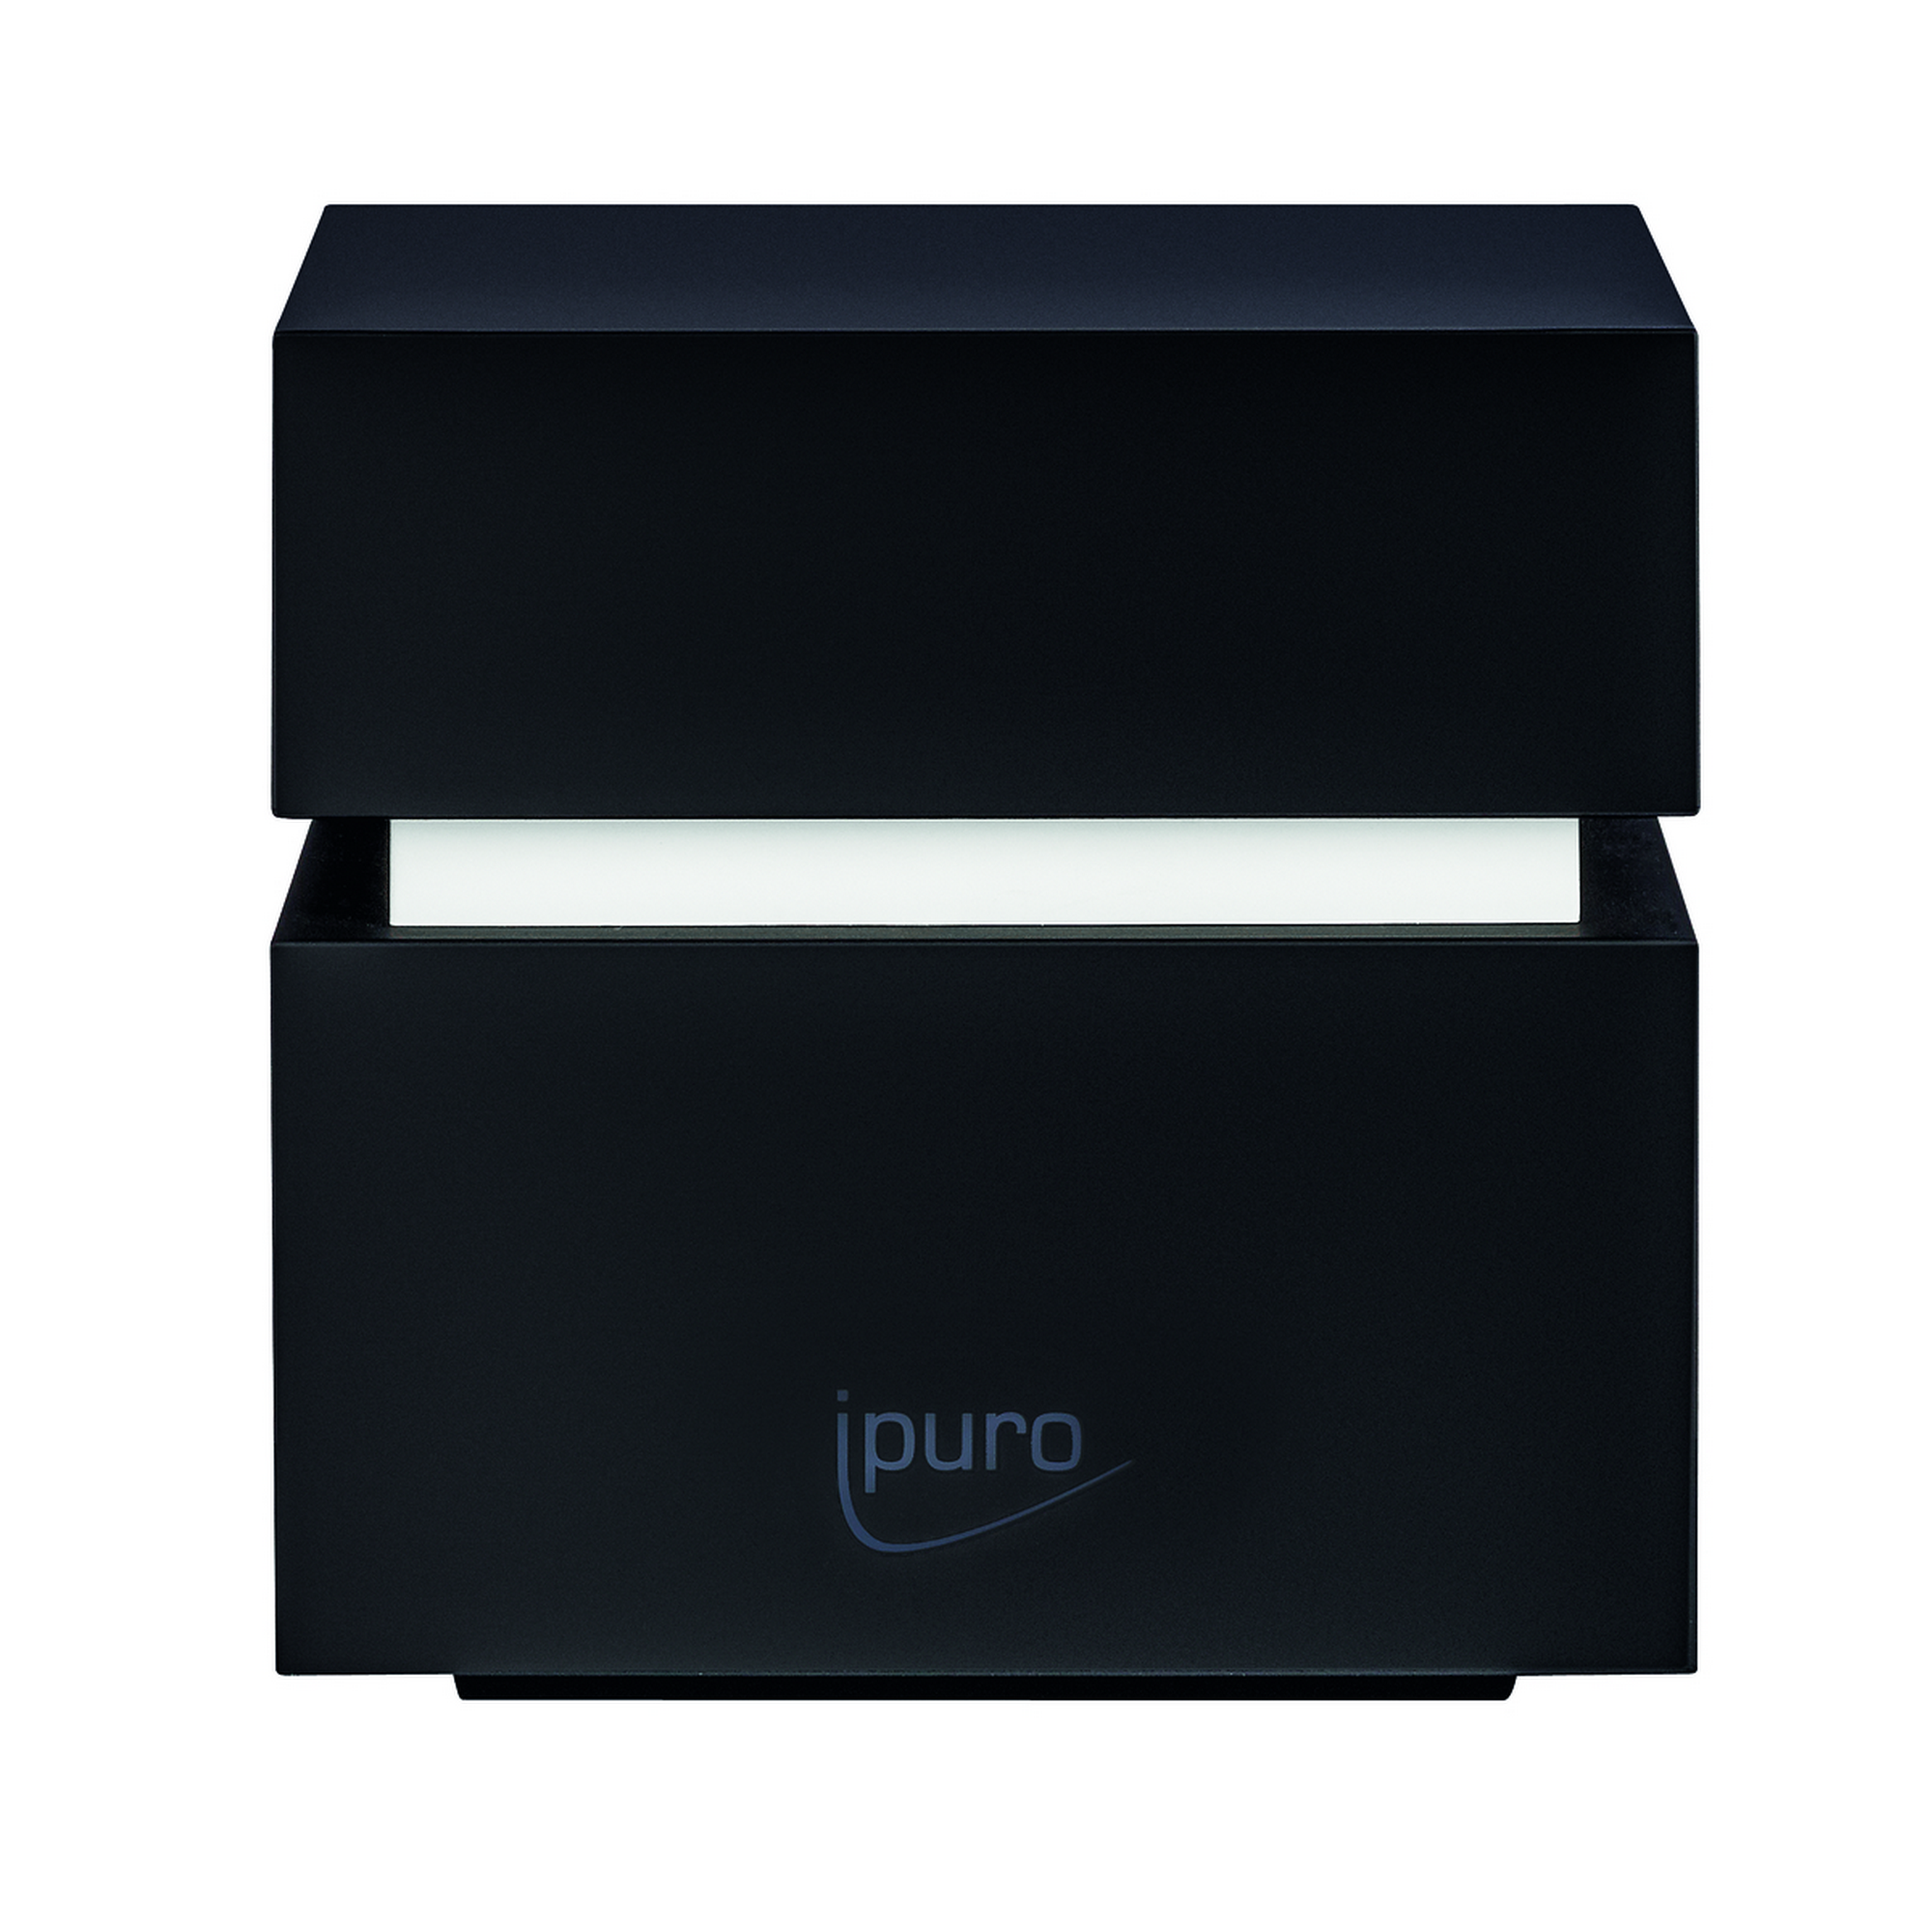 ipuro Air Pearls Electric Mini Cube + product picture